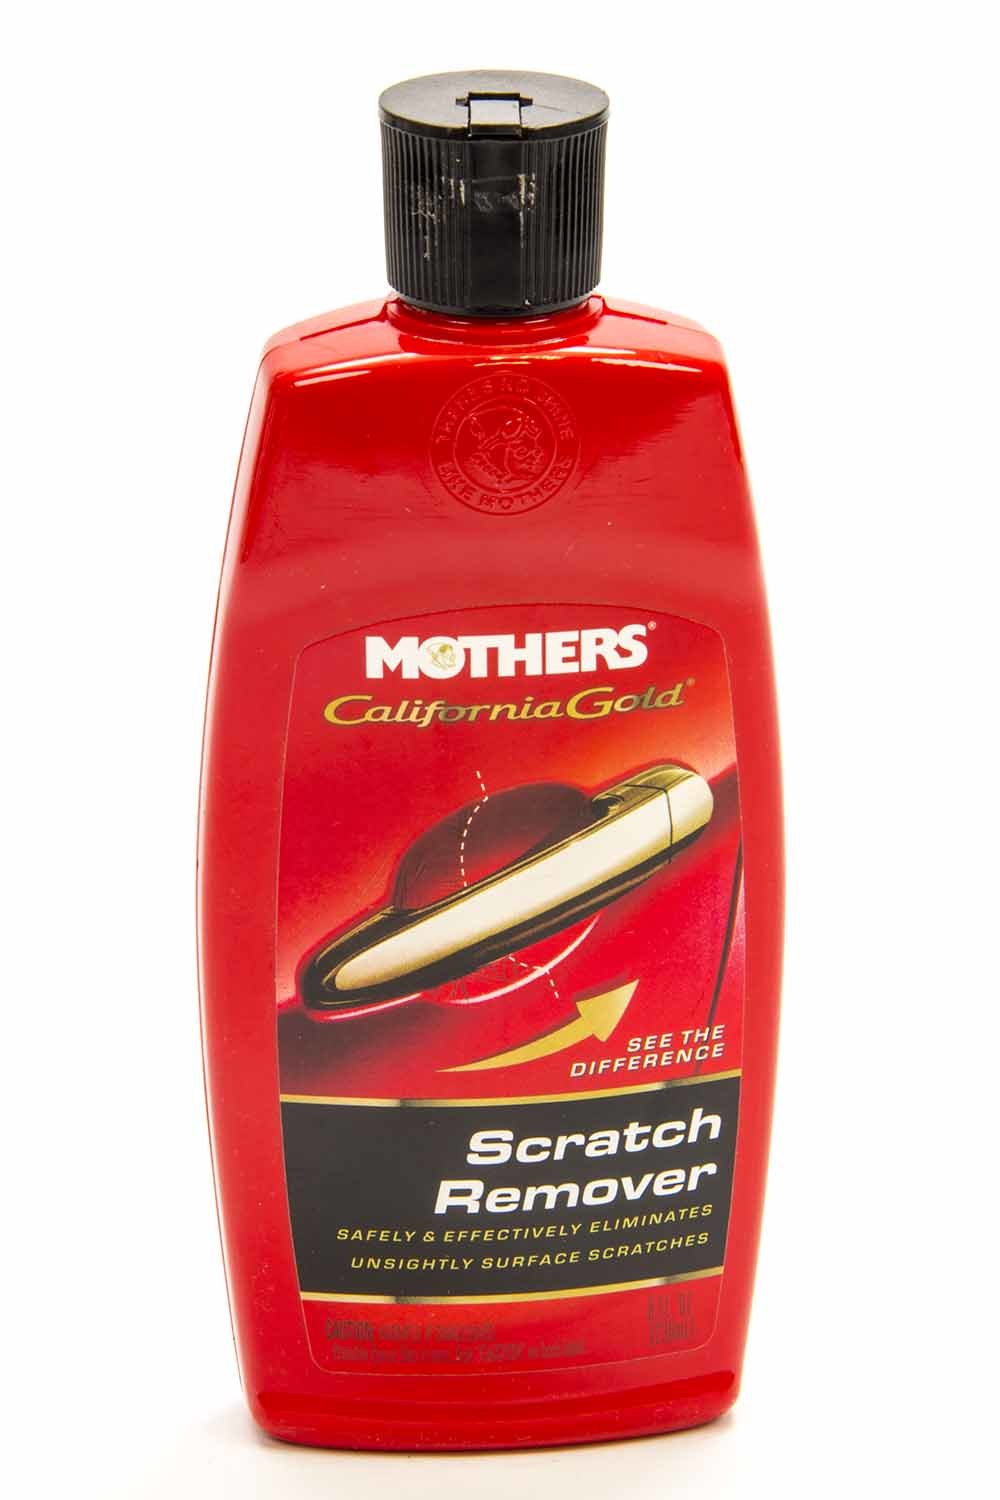 MOTHERS Polishing Compound, Scratch Remover, 8 oz Bottle, Each